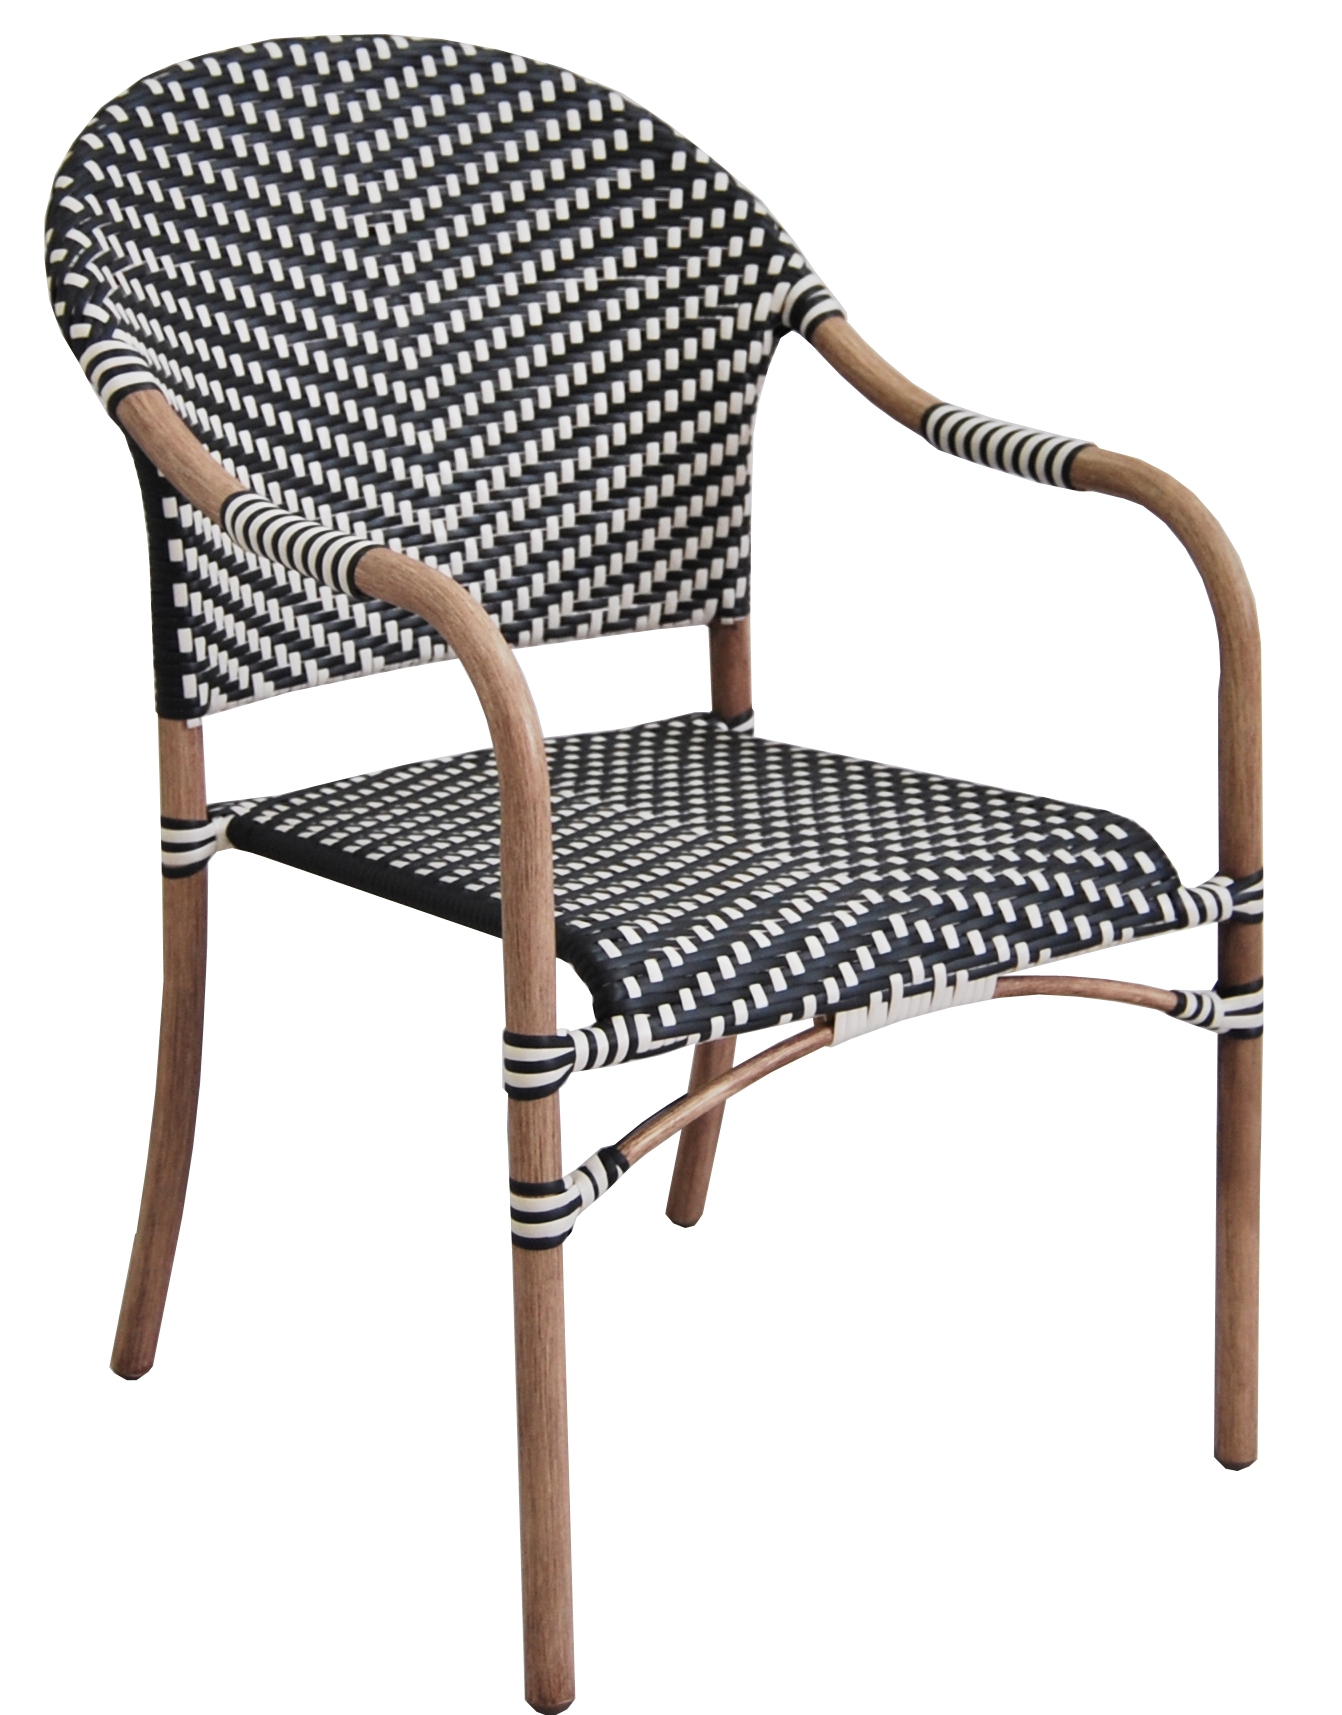 Better Homes & Gardens Parisian Bistro Dining Chair - image 1 of 6